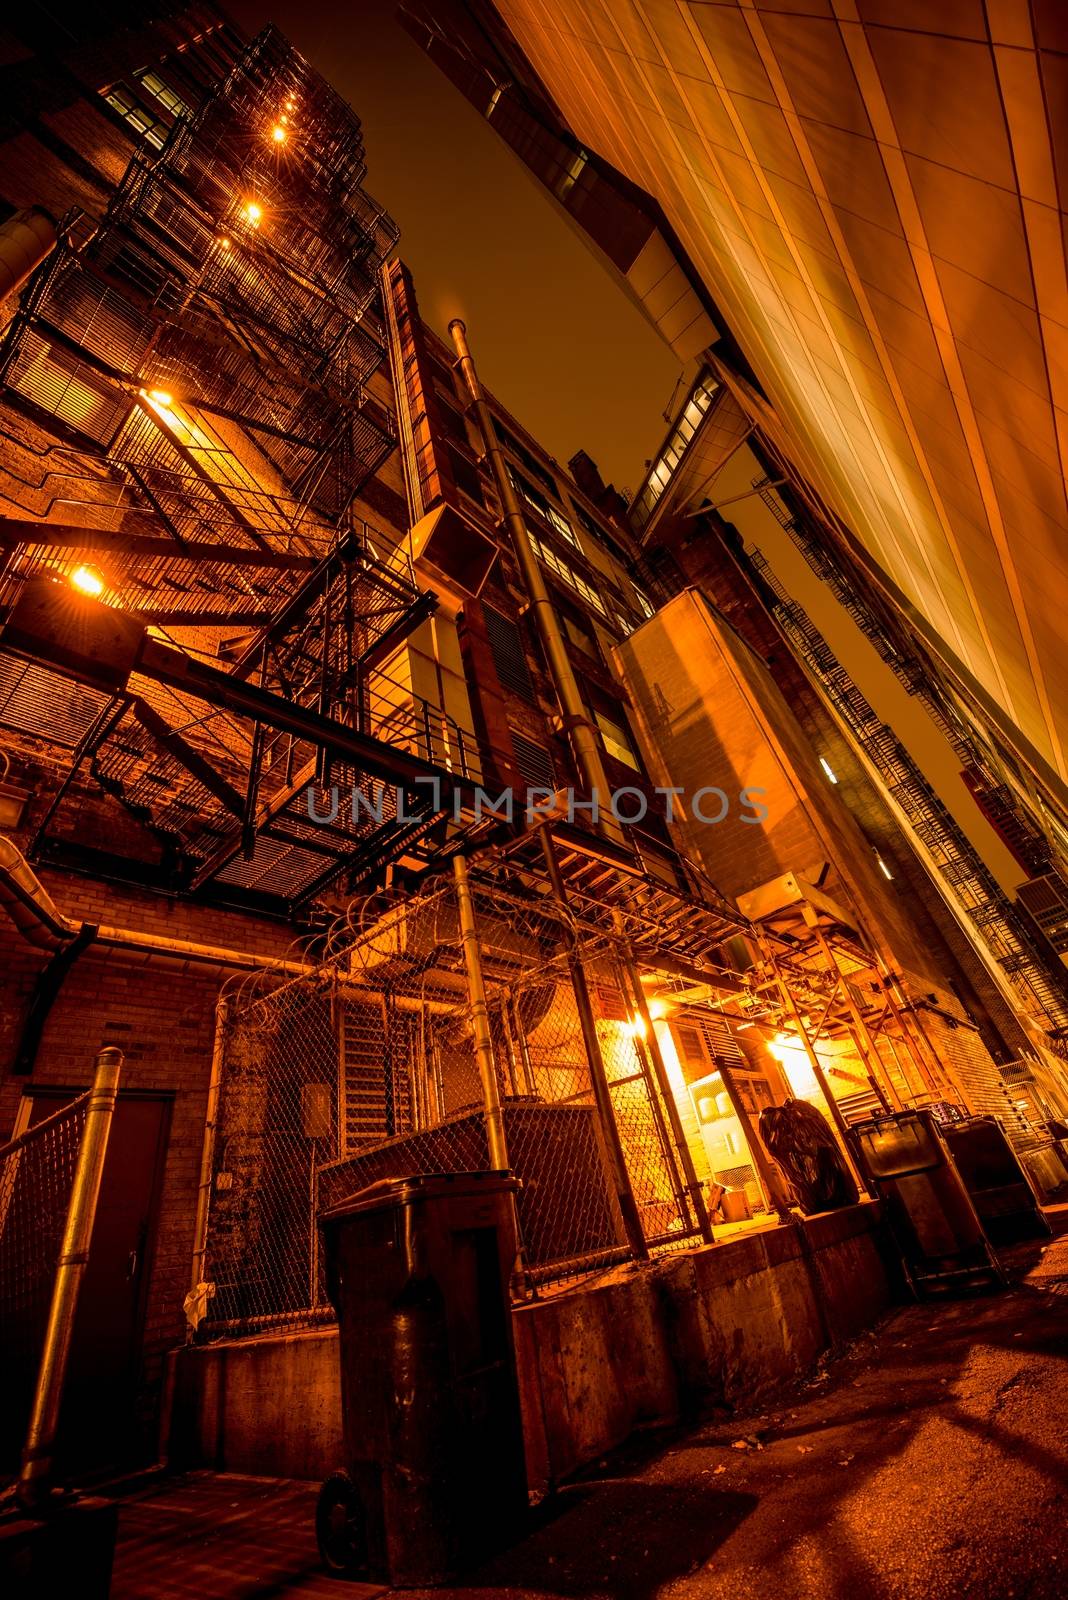 The Alley Place at Night. Large American City Alley in Super Wide Angle.